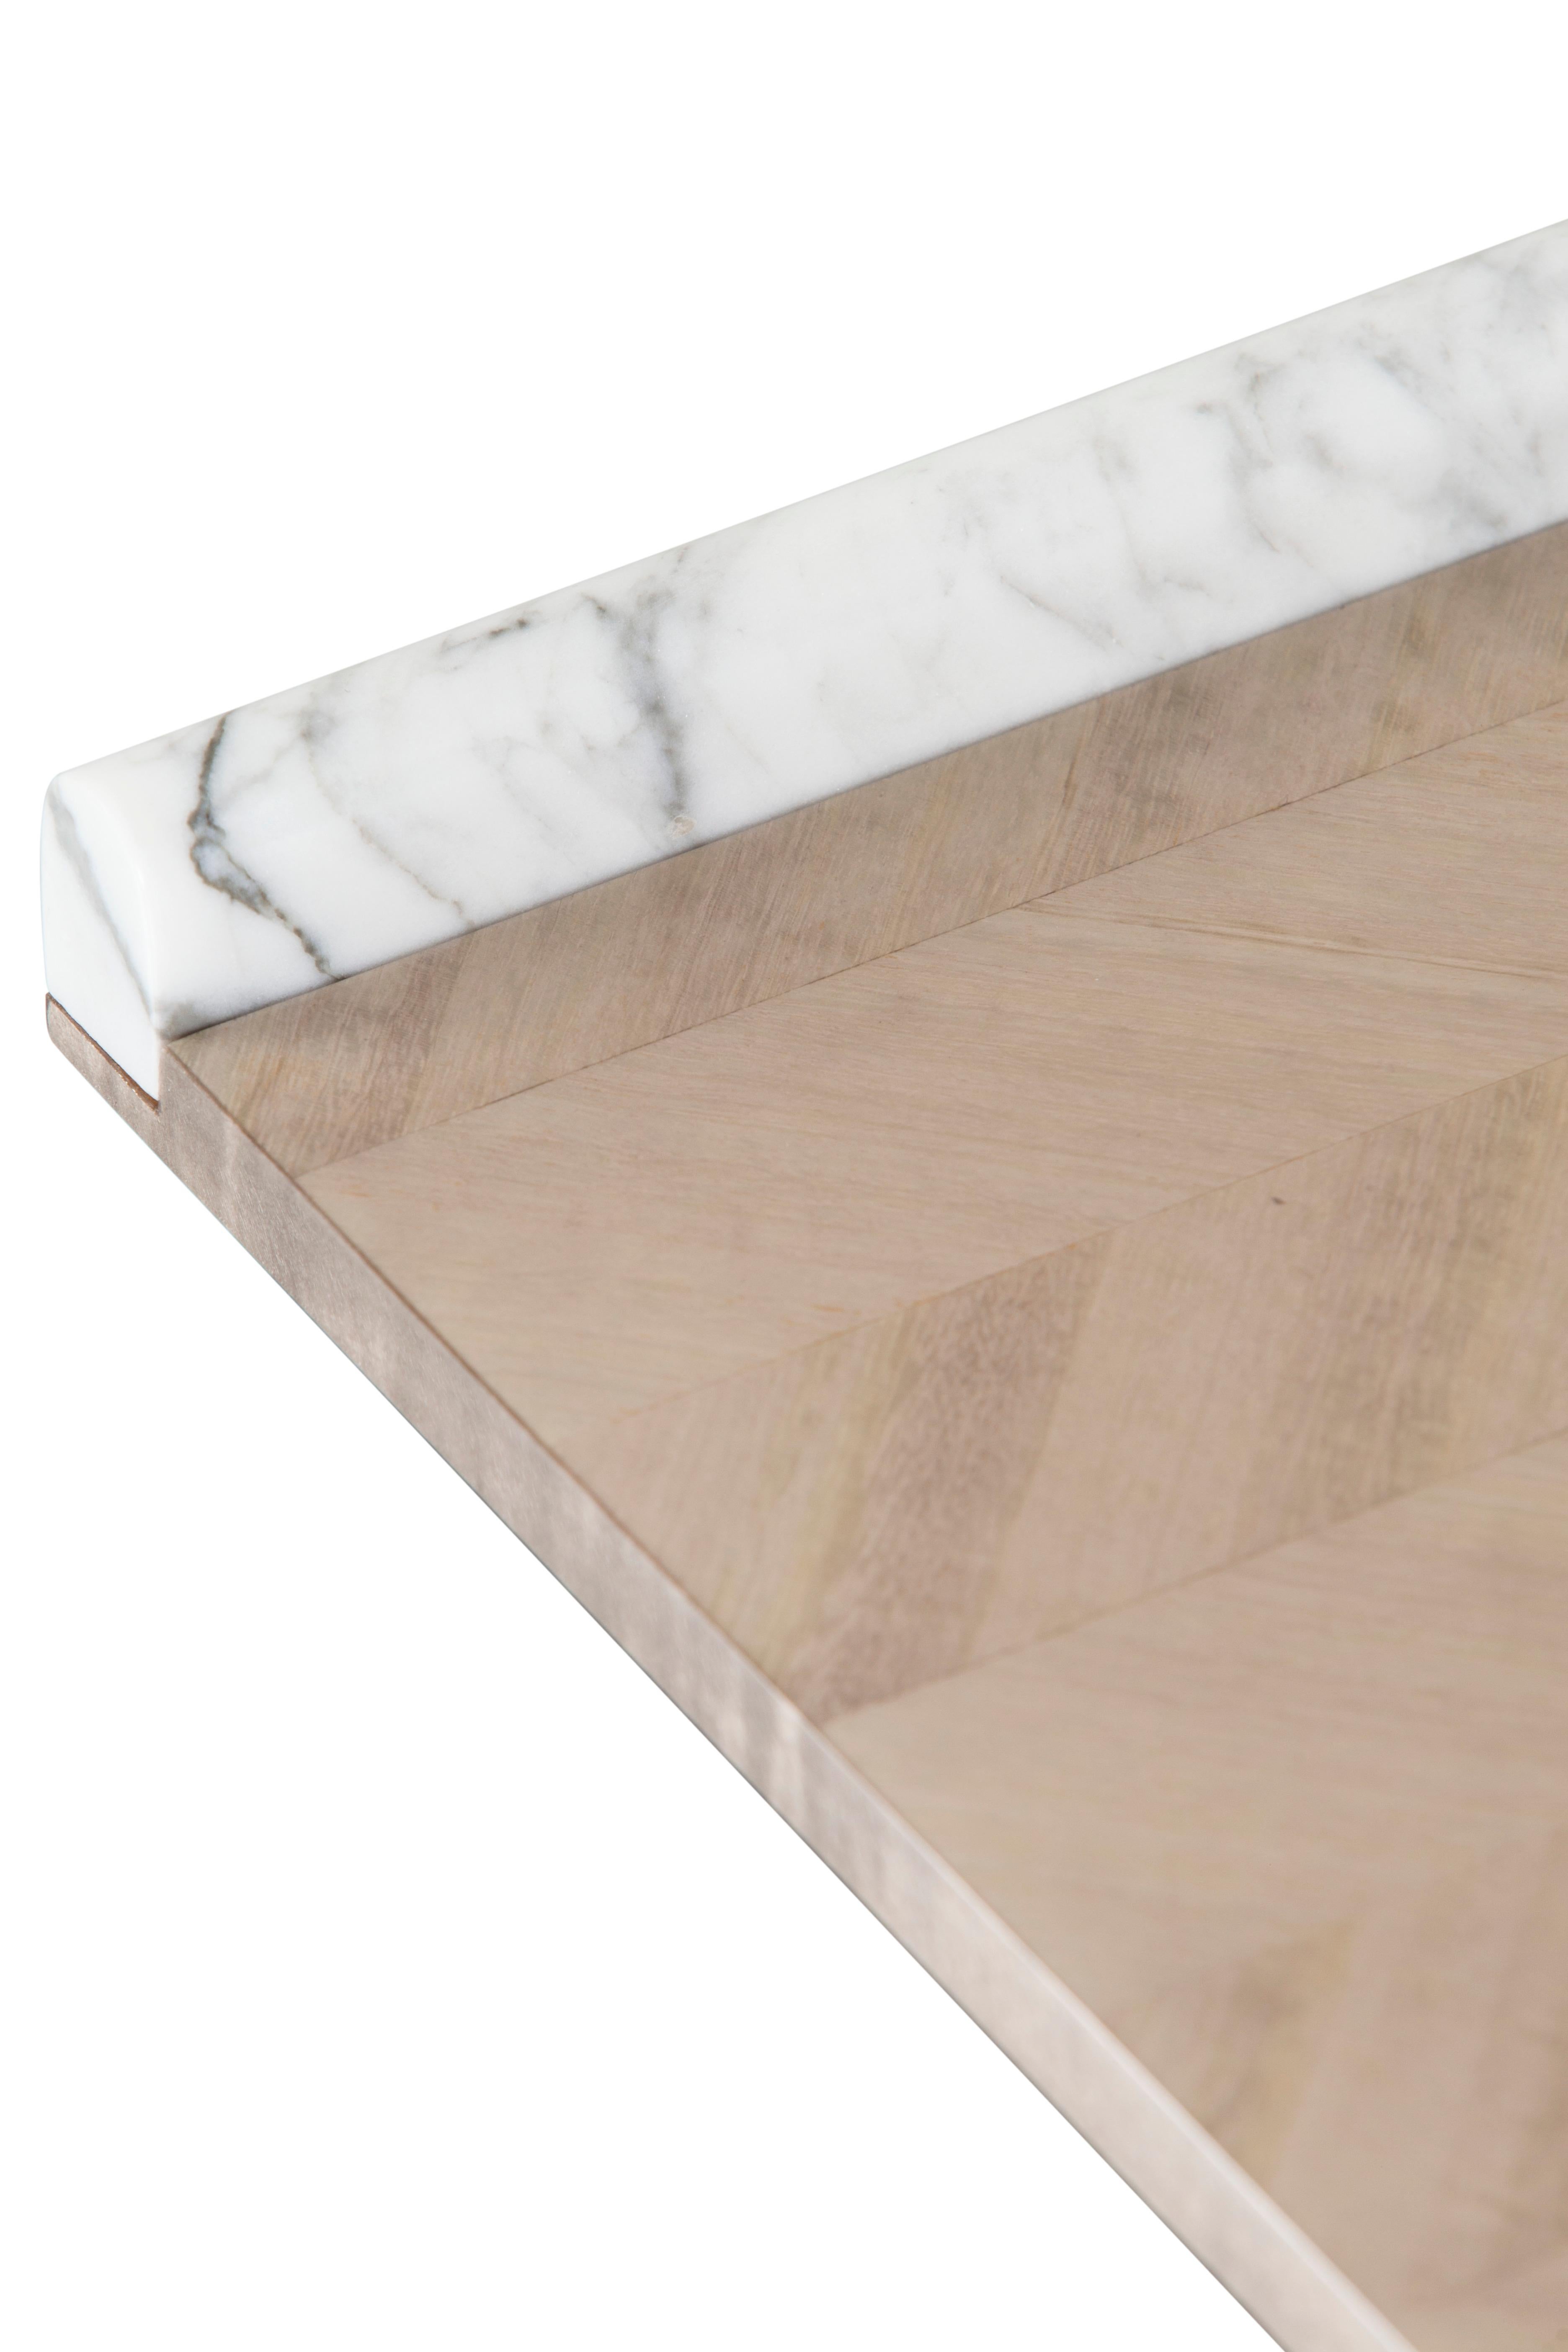 Hand-Crafted Modern Serving Tray Calacatta Marble Eucalyptus Handmade Portugal Lusitanus Home For Sale